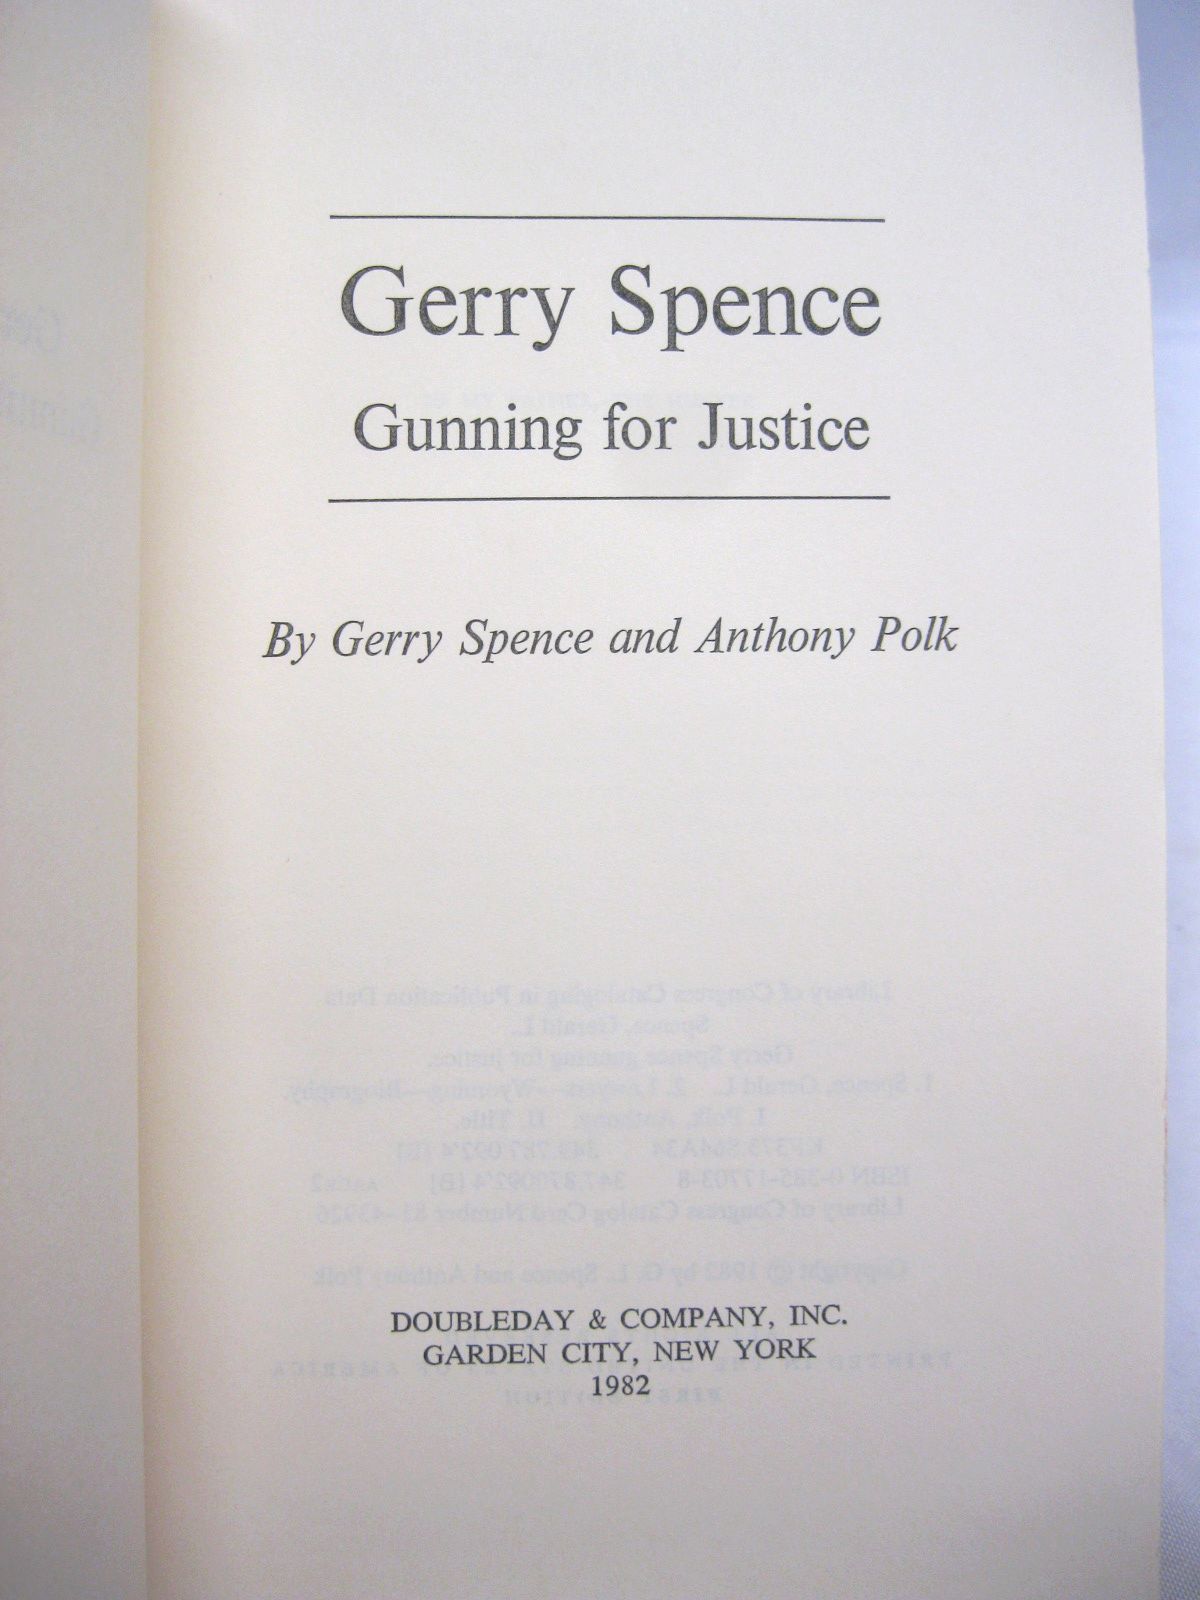 Gunning for Justice: My Life and Trials by Gerry Spence and Anthony Polk